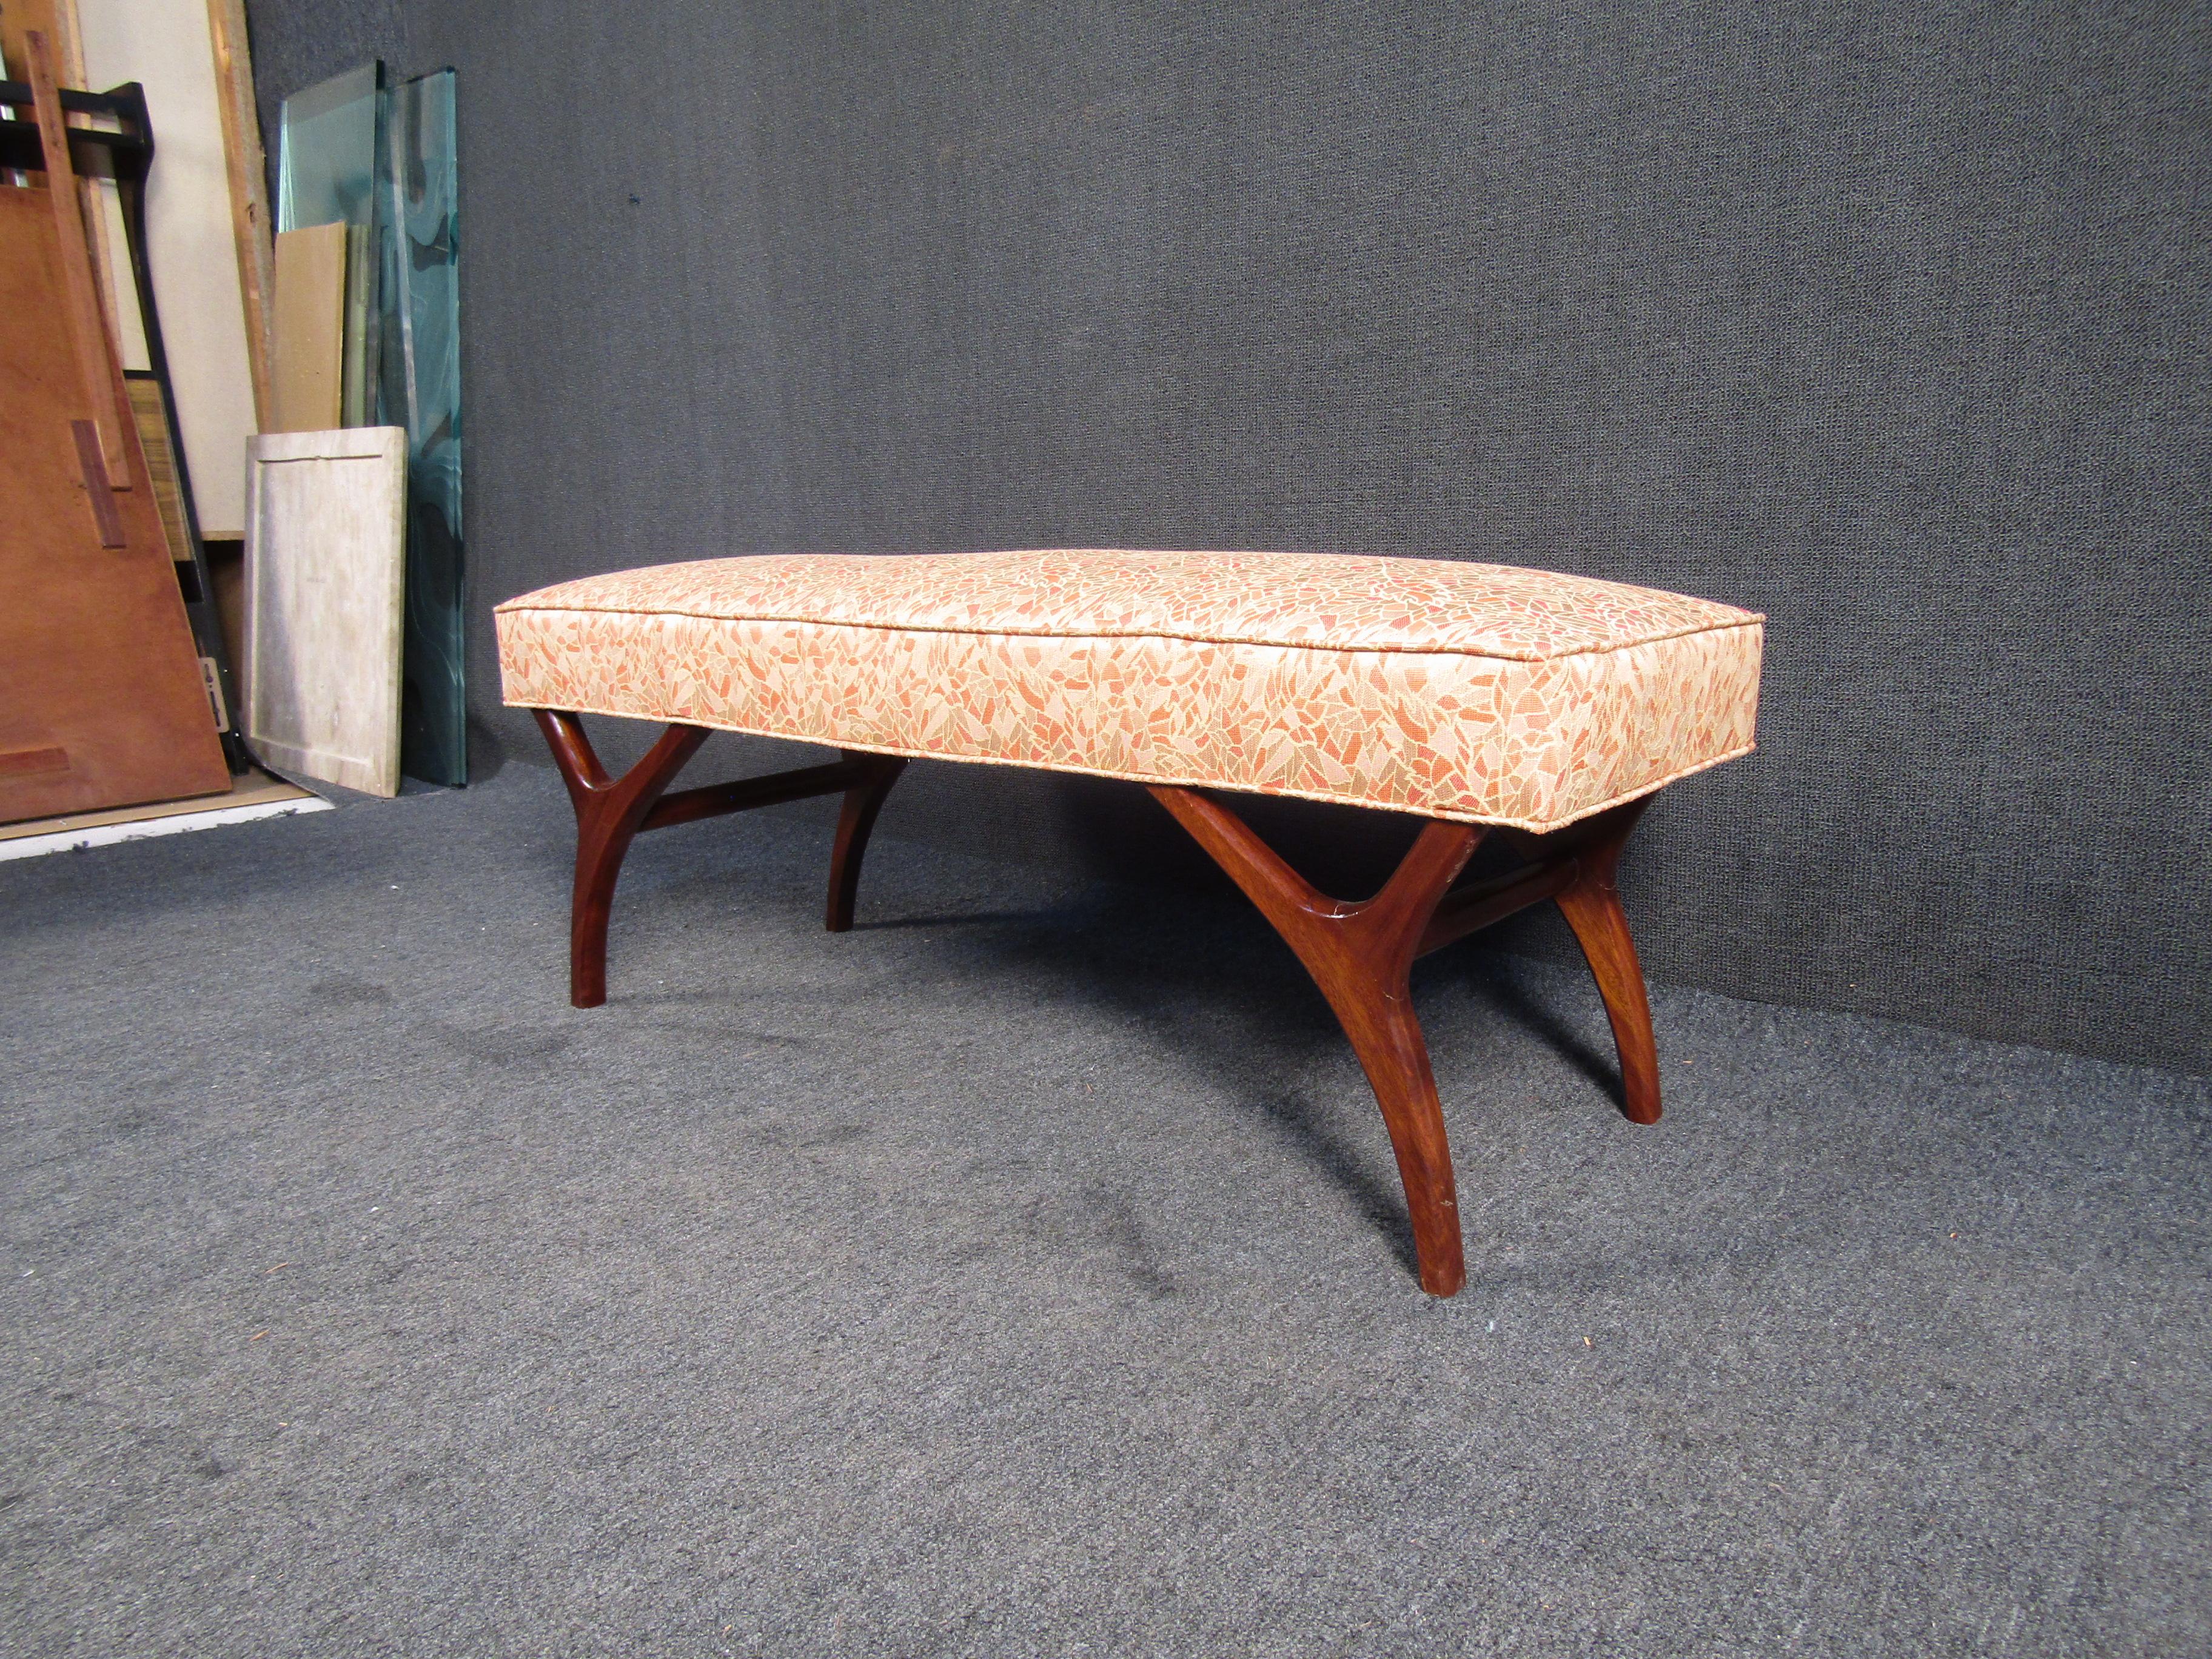 Beautiful Mid Century side bench with Wooden Legs. This bench features a unique floral pattern seat and finished wooden legs. This would make a great addition to any space needing some extra seating.

Please confirm item location - NY or NJ - with